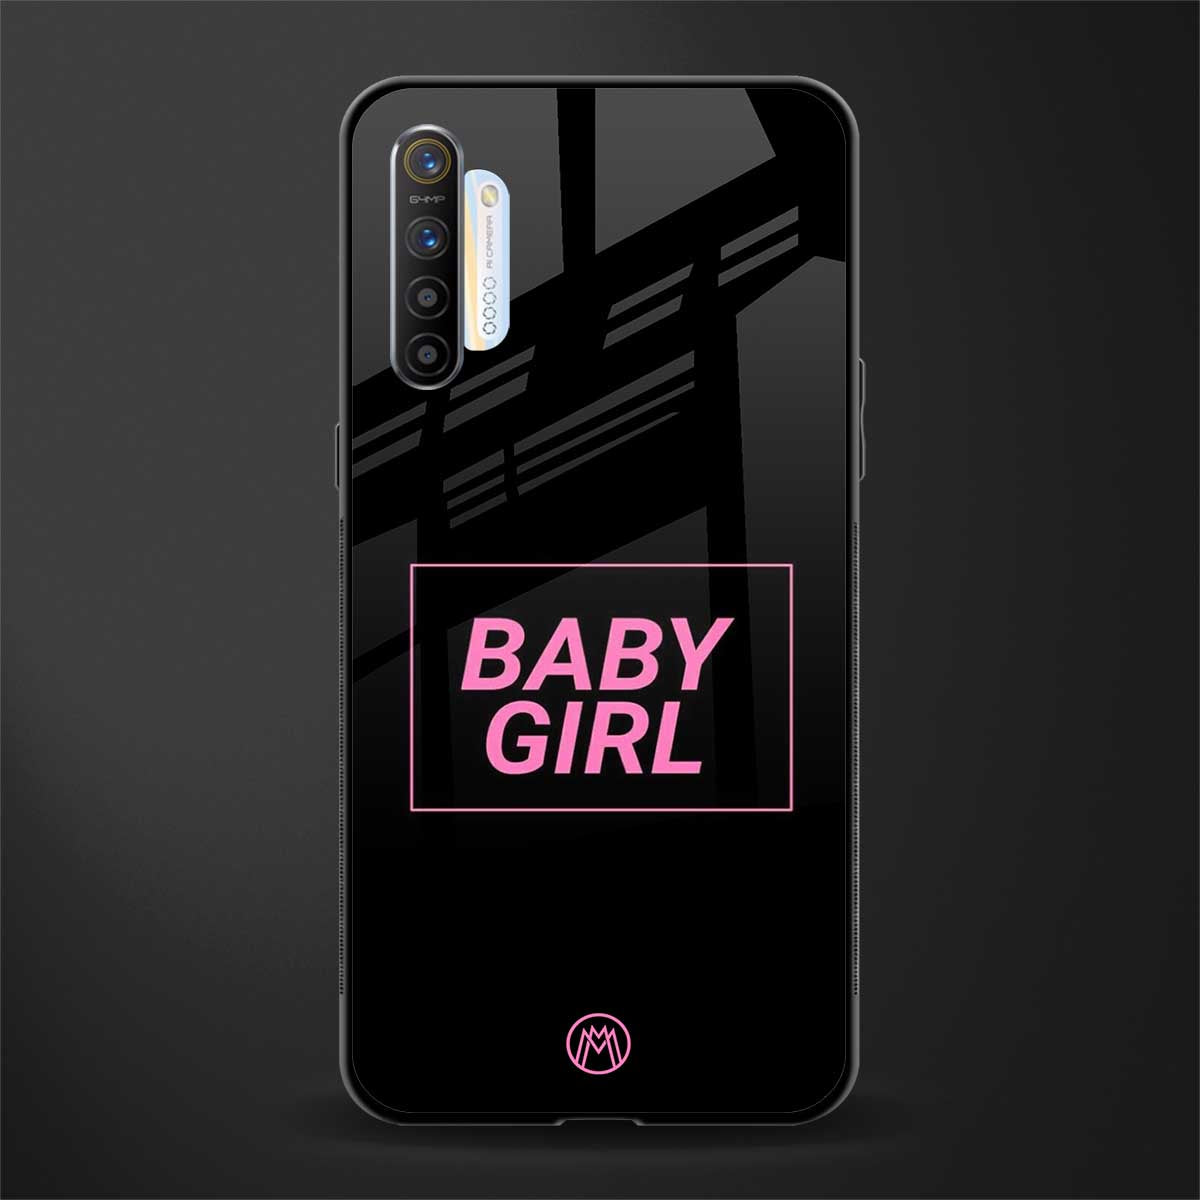 baby girl glass case for realme xt image